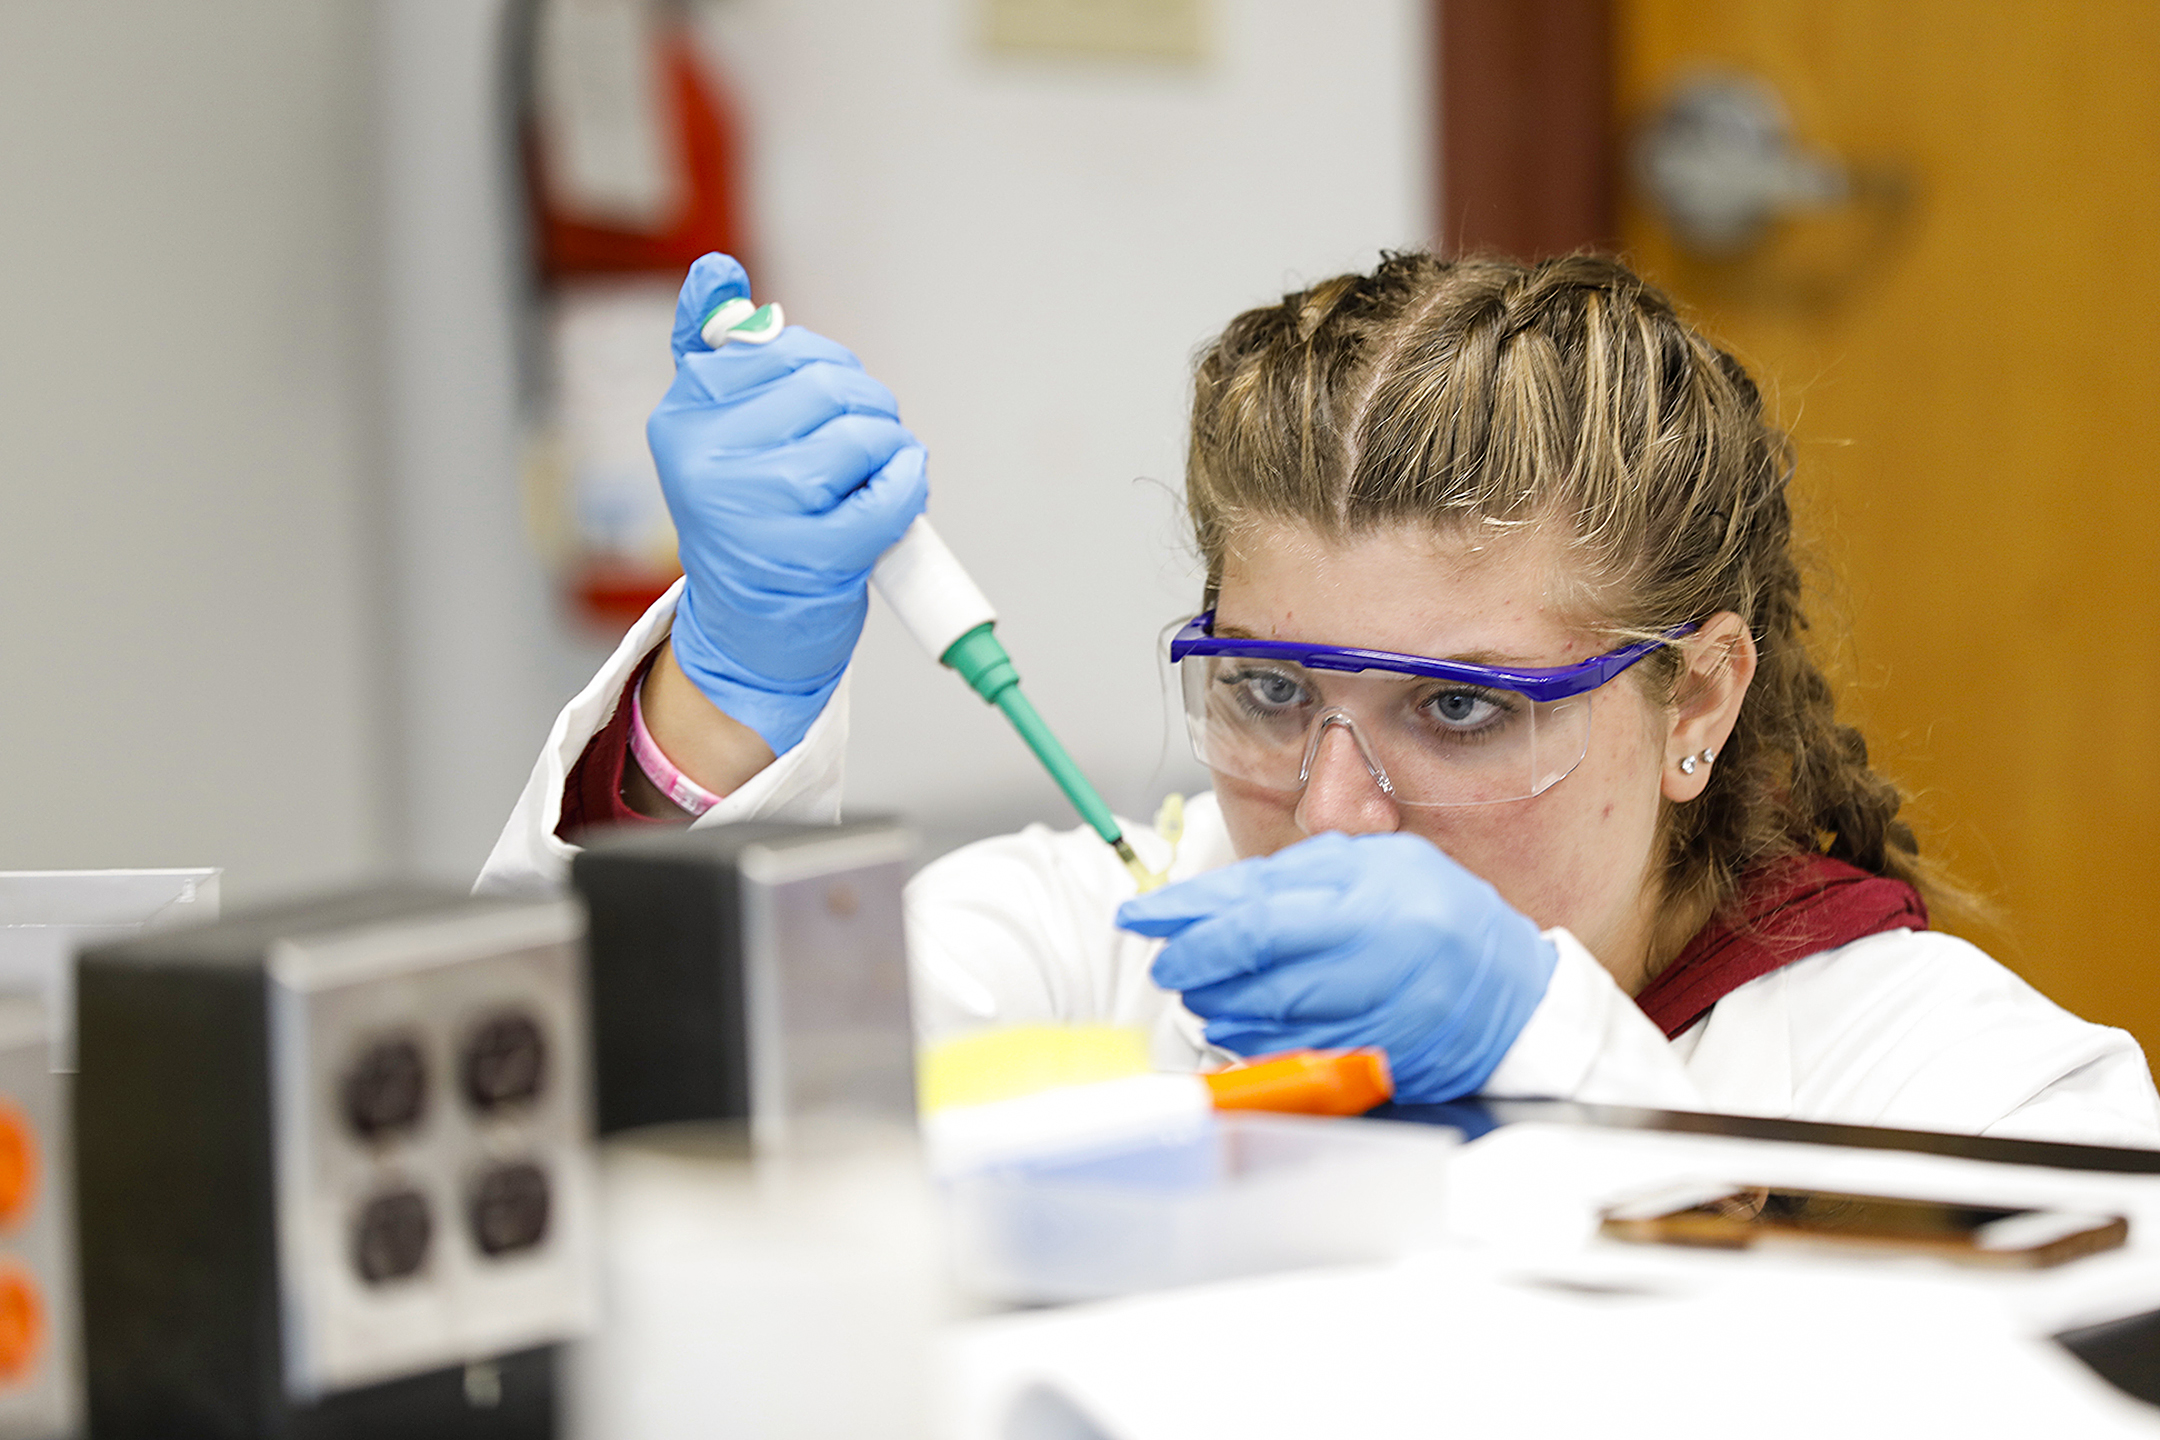 A female student working on an experiment in the biology lab.